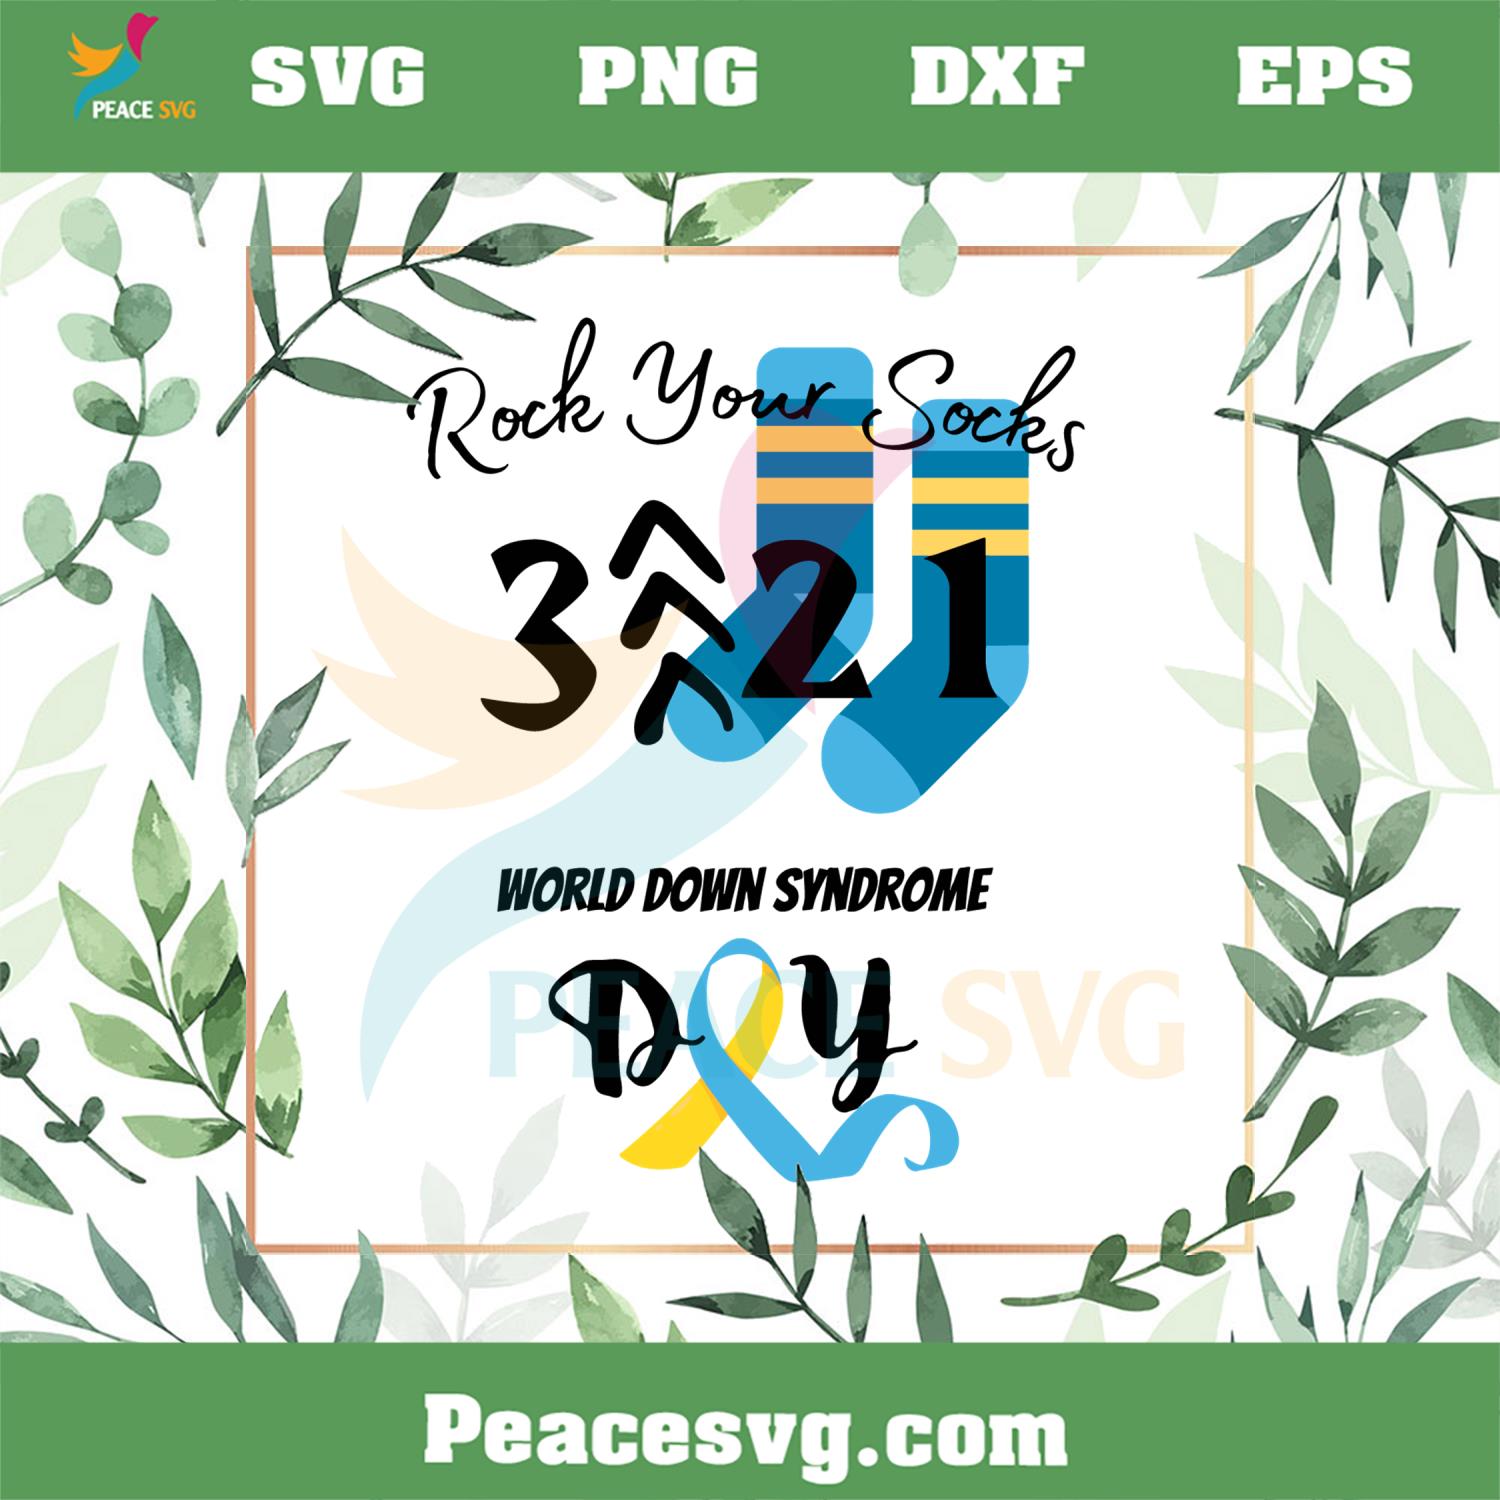 Rock Your Socks 3 21 World Down Syndrome Day SVG Cutting Files